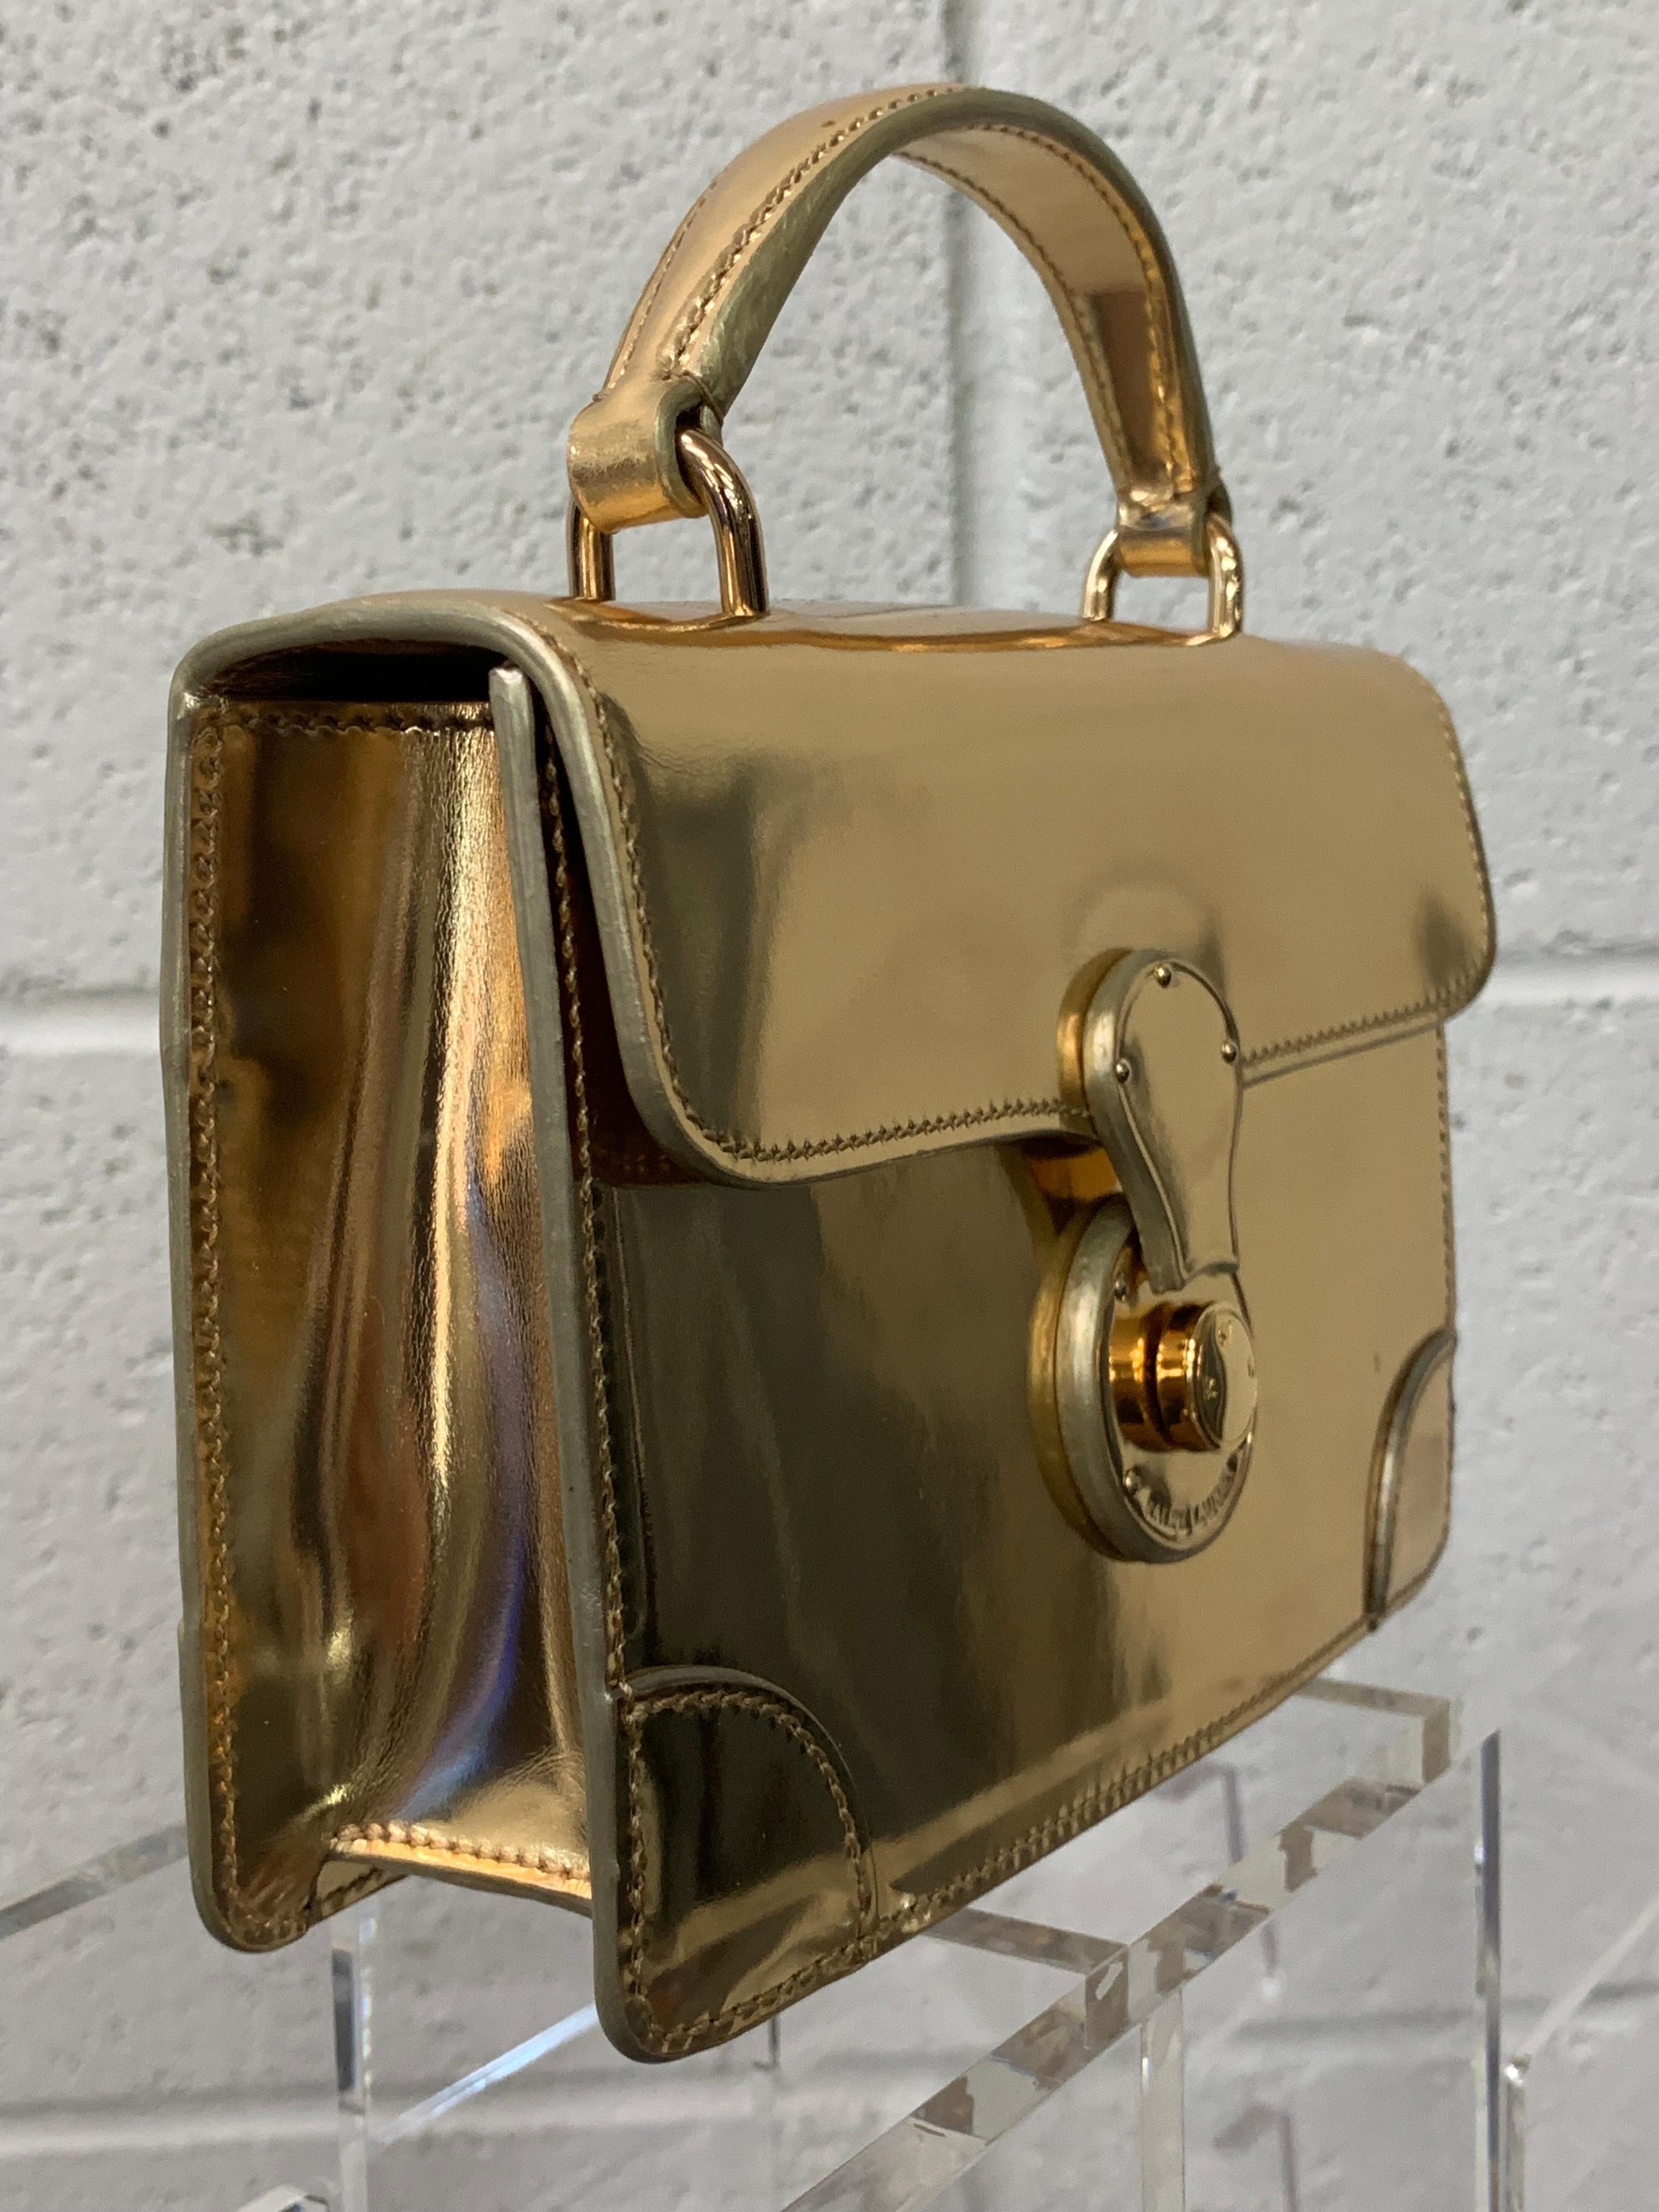 Ralph Lauren Gold Metallic Leather Mini Box Bag w Top Handle Shoulder Strap In New Condition For Sale In Gresham, OR